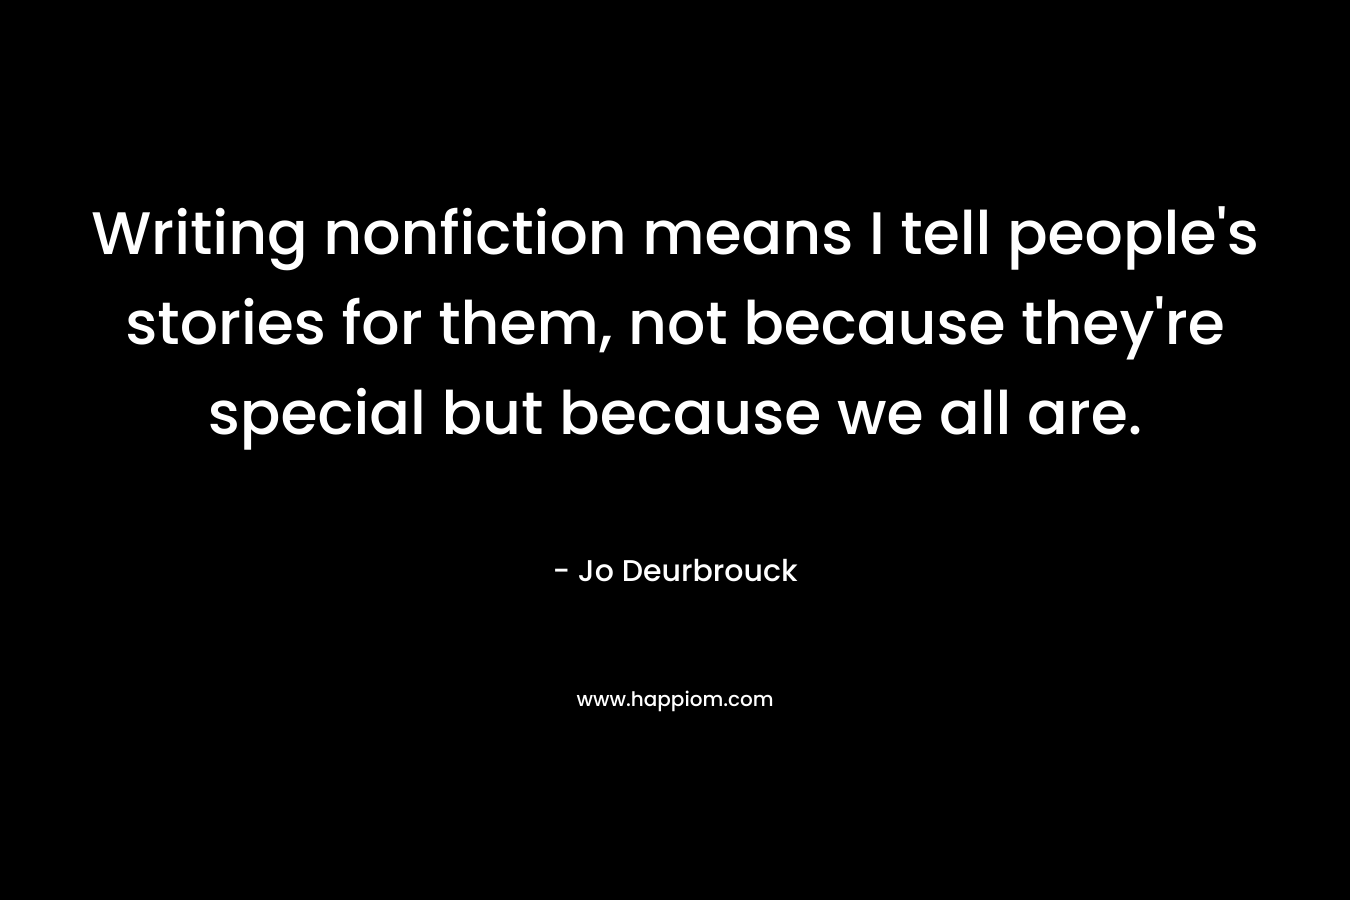 Writing nonfiction means I tell people's stories for them, not because they're special but because we all are.